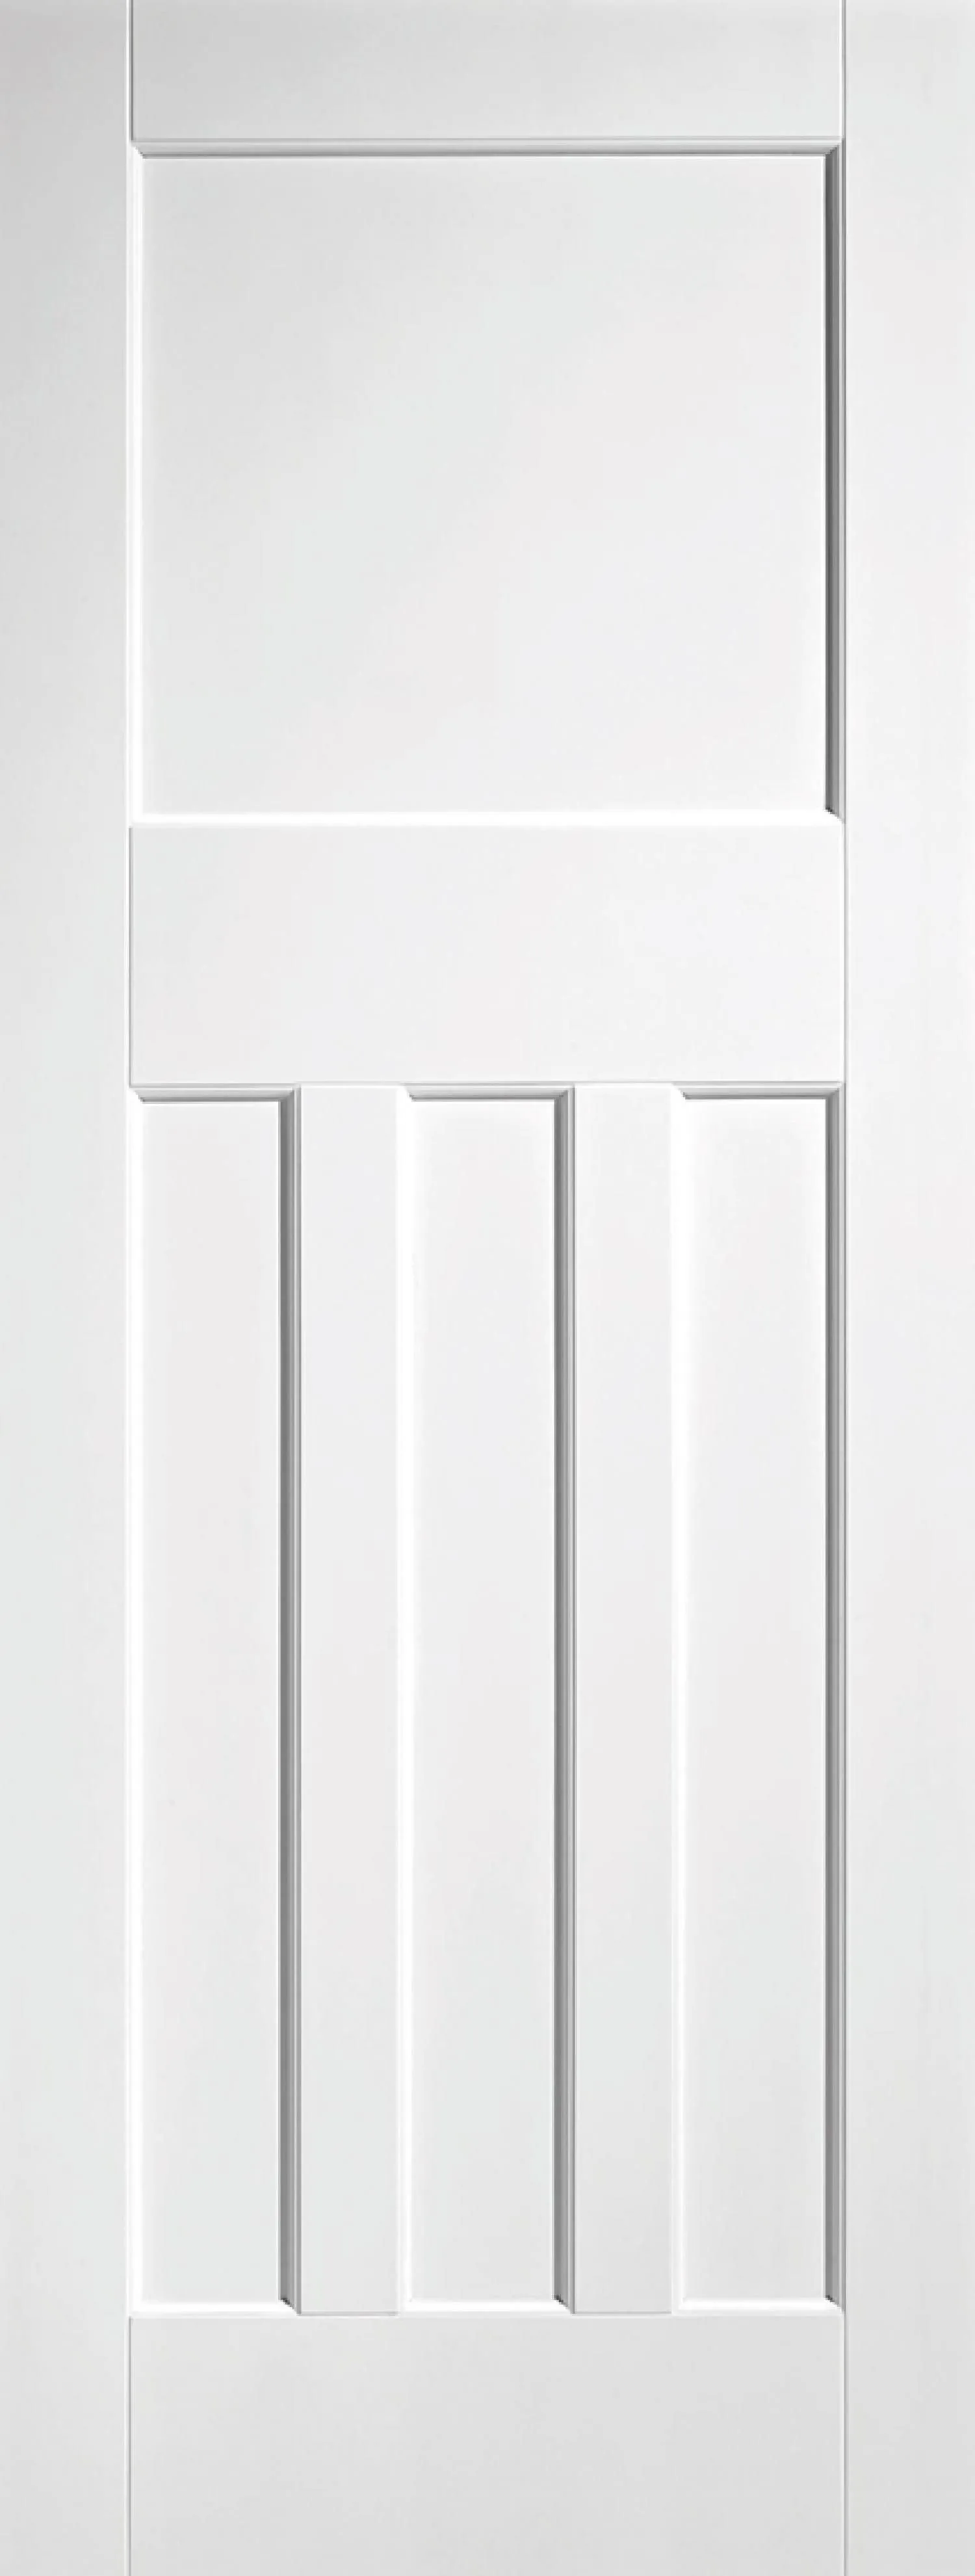 DX Solid Core FD30 Internal Door - White Primed - DX30's 1981 x 762mm White   WFDX30FC